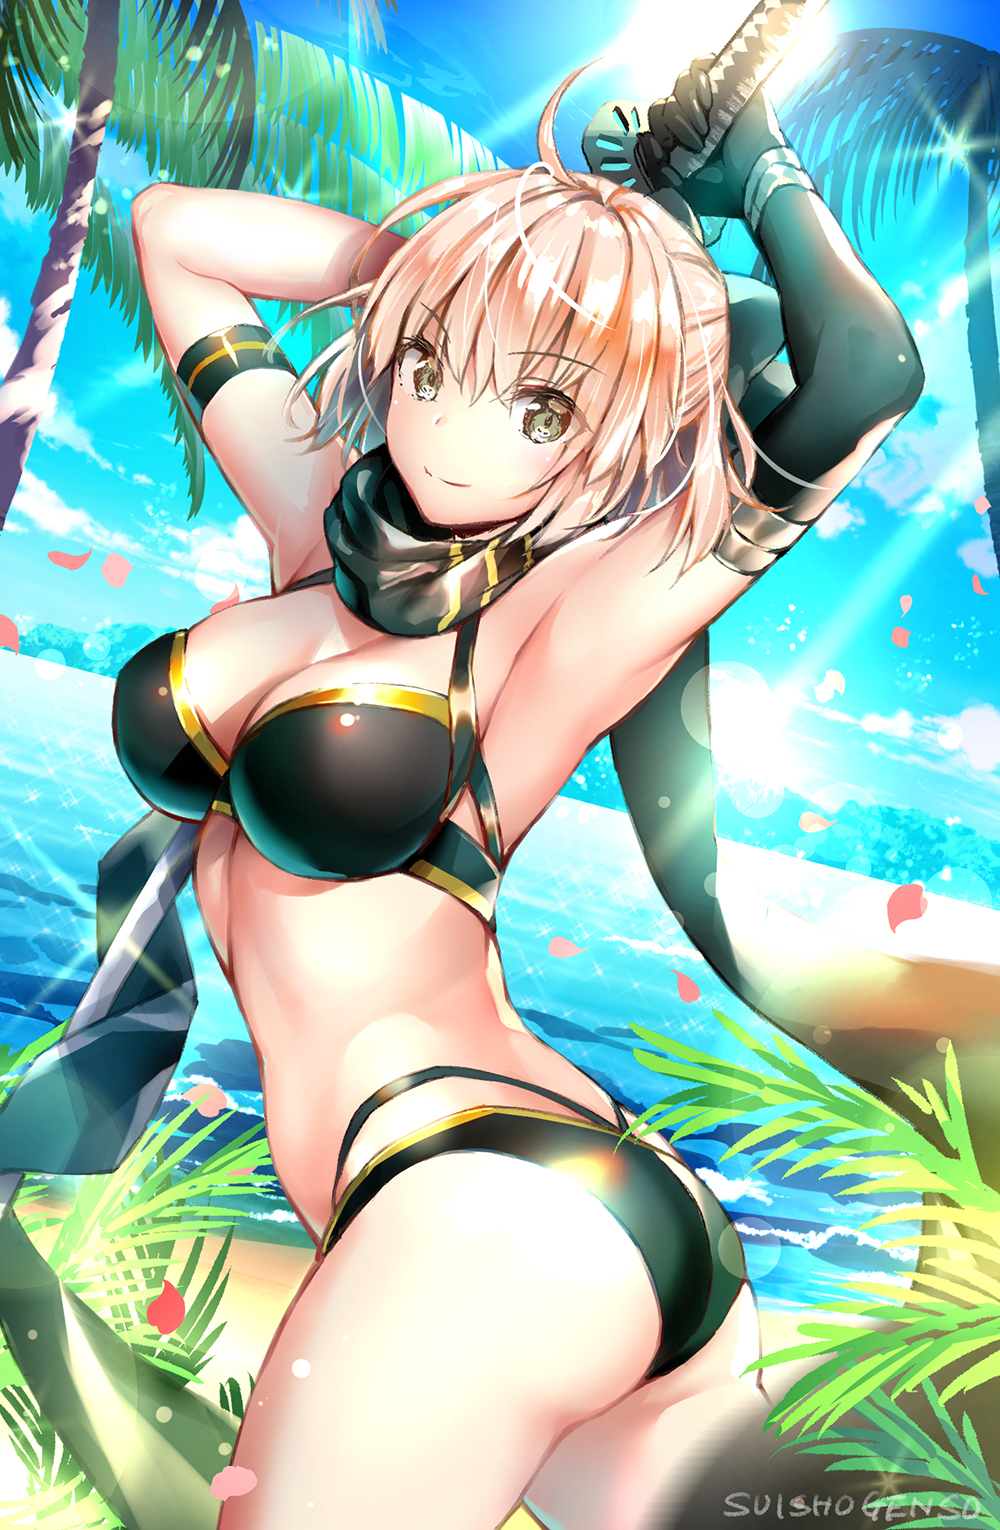 Anime 1000x1530 anime anime girls digital art artwork portrait display 2D Suishougensou Fate/Grand Order Fate series Okita Souji beach sword scarf blonde bikini ass cleavage big boobs palm trees arms up looking back petals looking at viewer sky